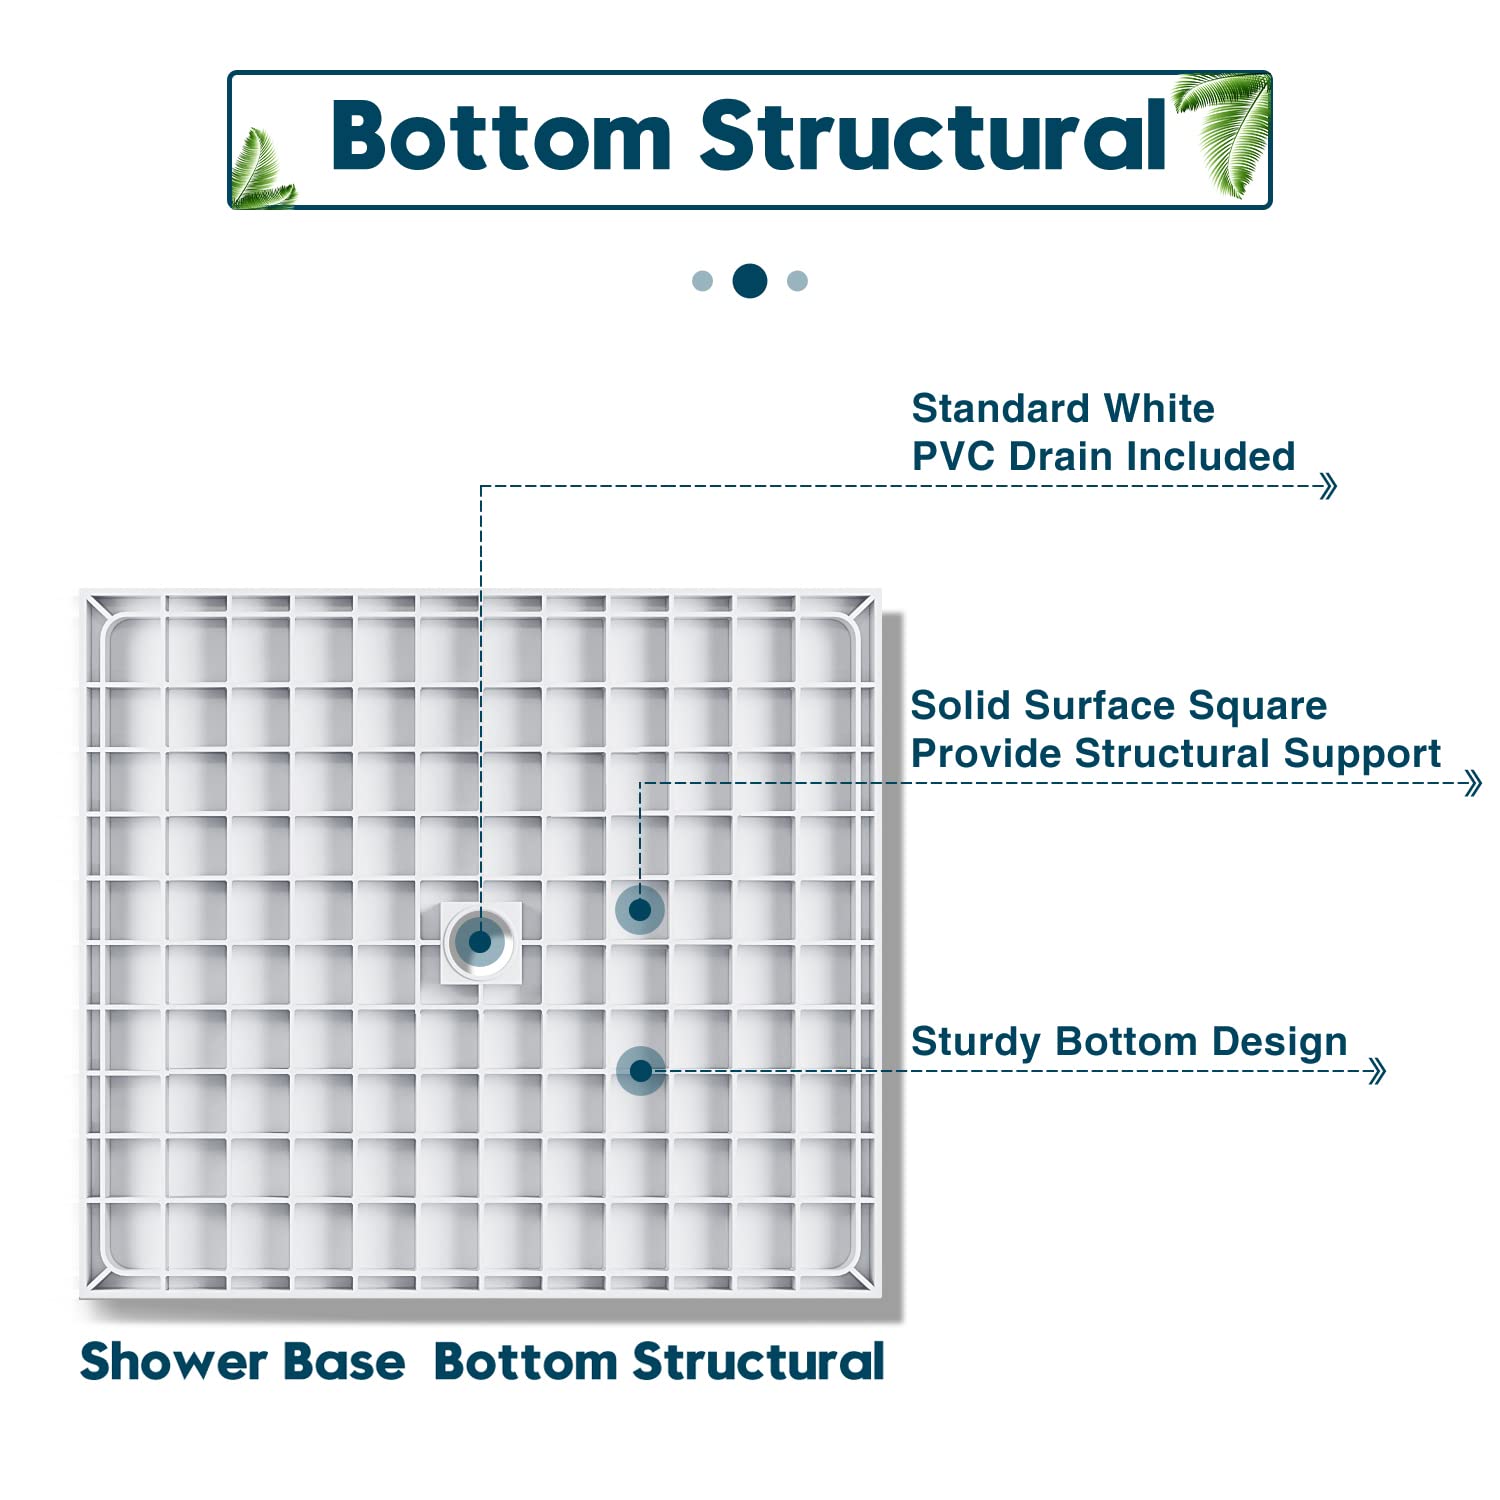 Bottom Structural, Standard White PVC Drain Included, Solid Surface Square, Provide Structural Support, Sturdy Bottom Design